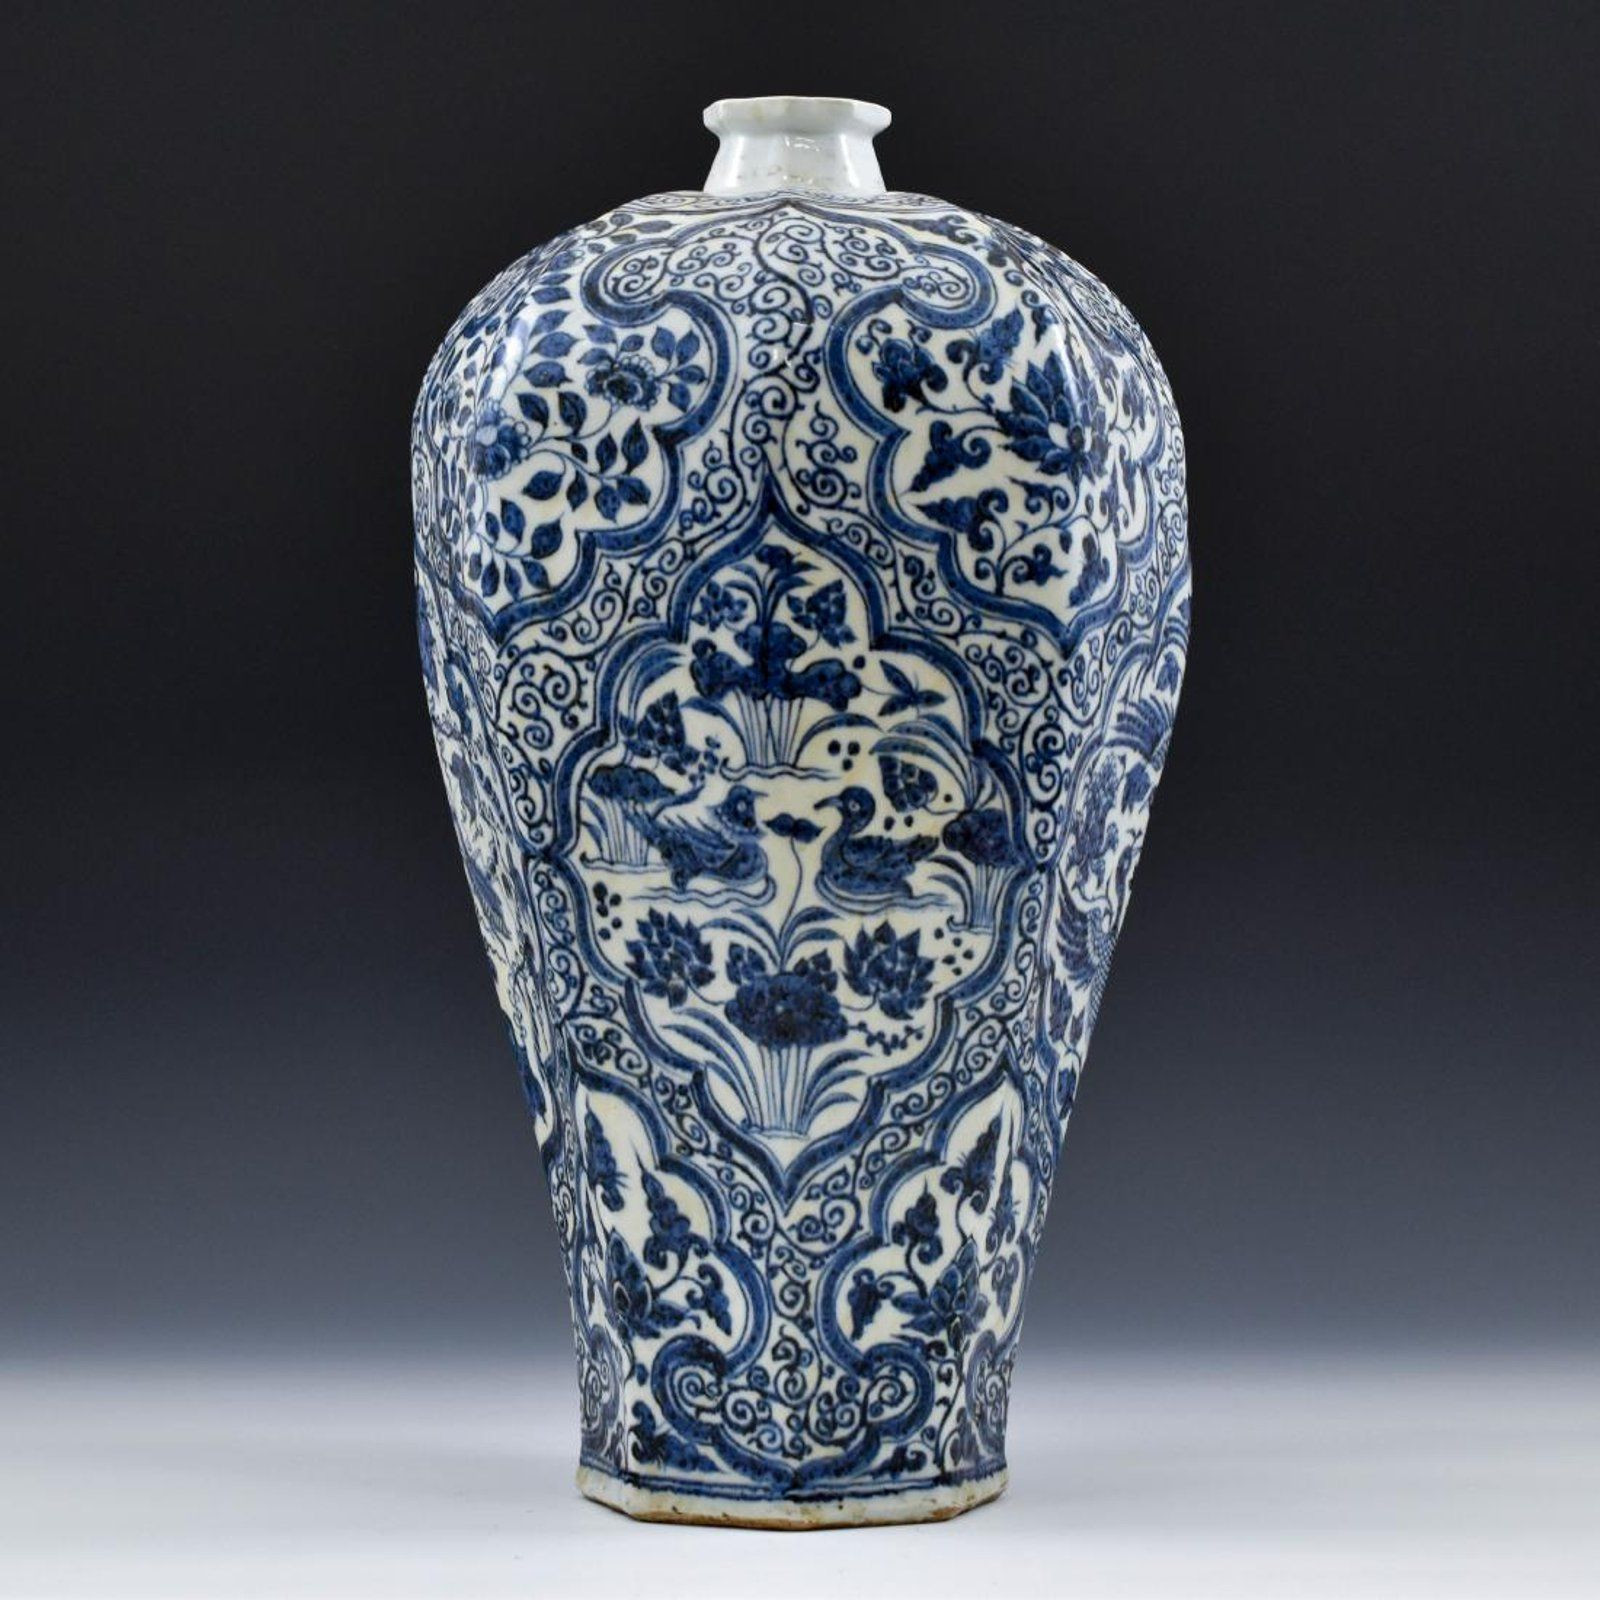 17 Fashionable Blue Ceramic Vase 2024 free download blue ceramic vase of blue crystal vase beautiful ming dynasty blue and white octagonal with regard to blue crystal vase beautiful ming dynasty blue and white octagonal meiping vase